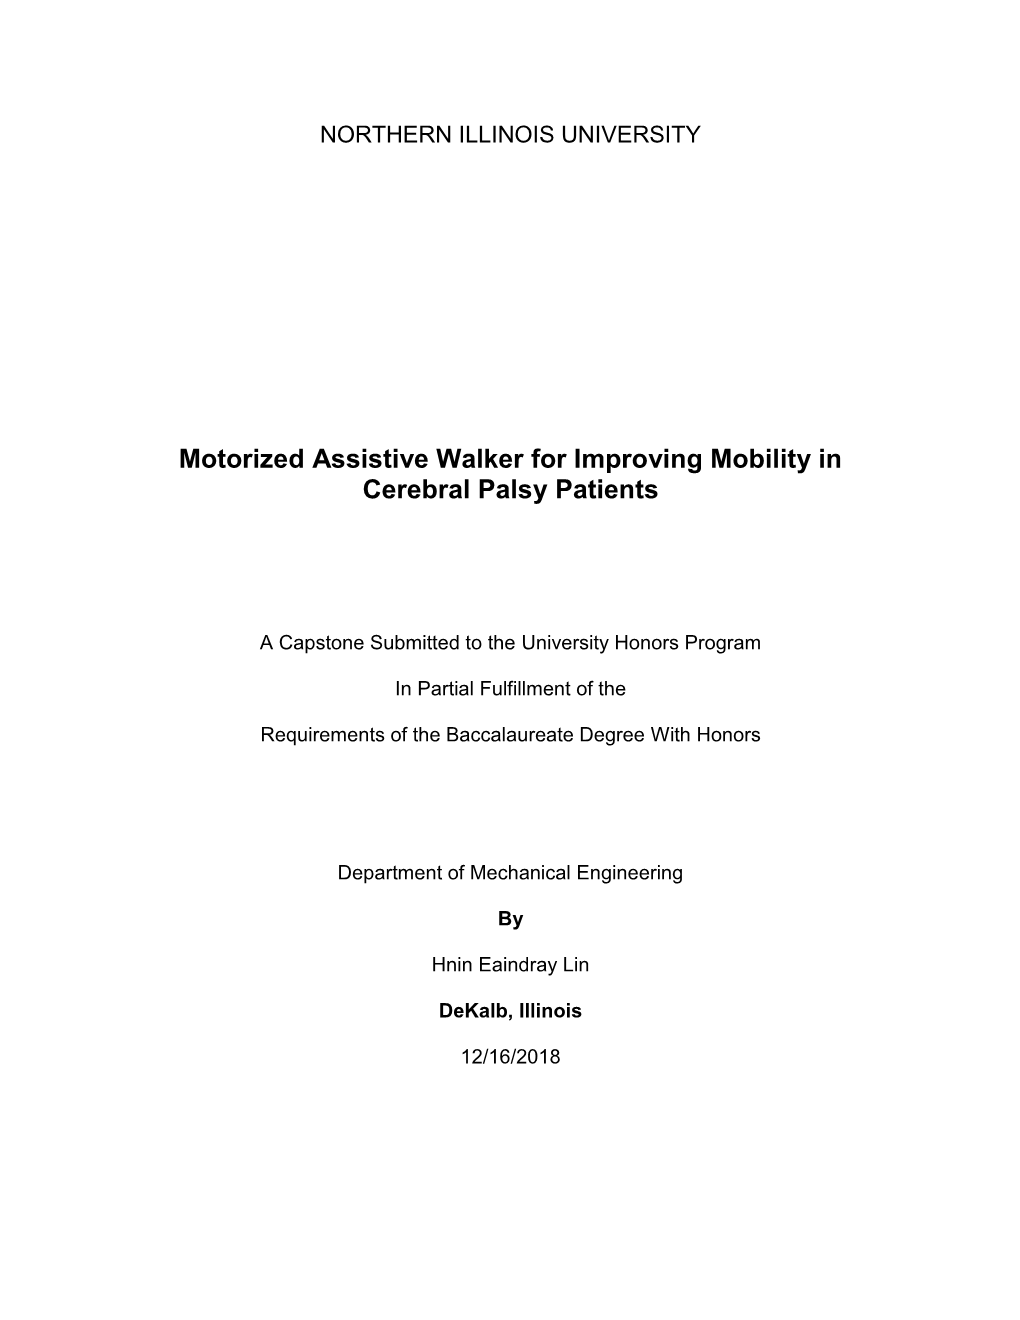 Motorized Assistive Walker for Improving Mobility in Cerebral Palsy Patients